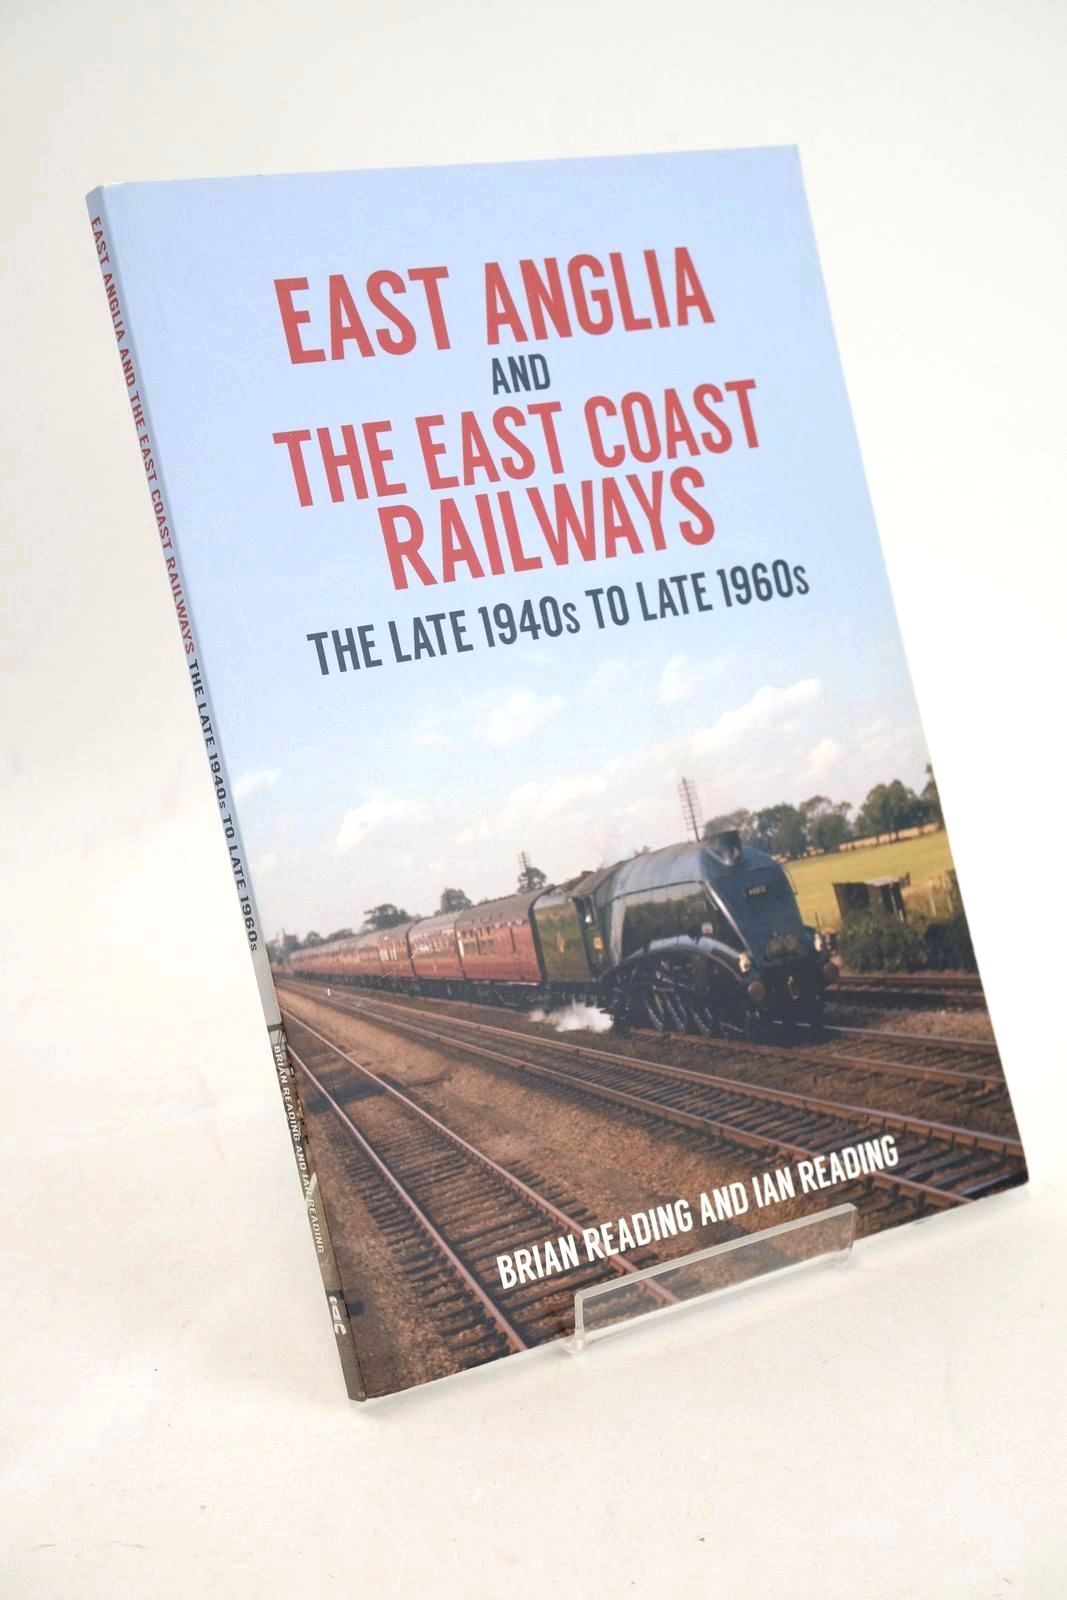 Photo of EAST ANGLIA AND THE EAST COAST RAILWAYS THE LATE 1940S TO LATE 1960S- Stock Number: 1327404